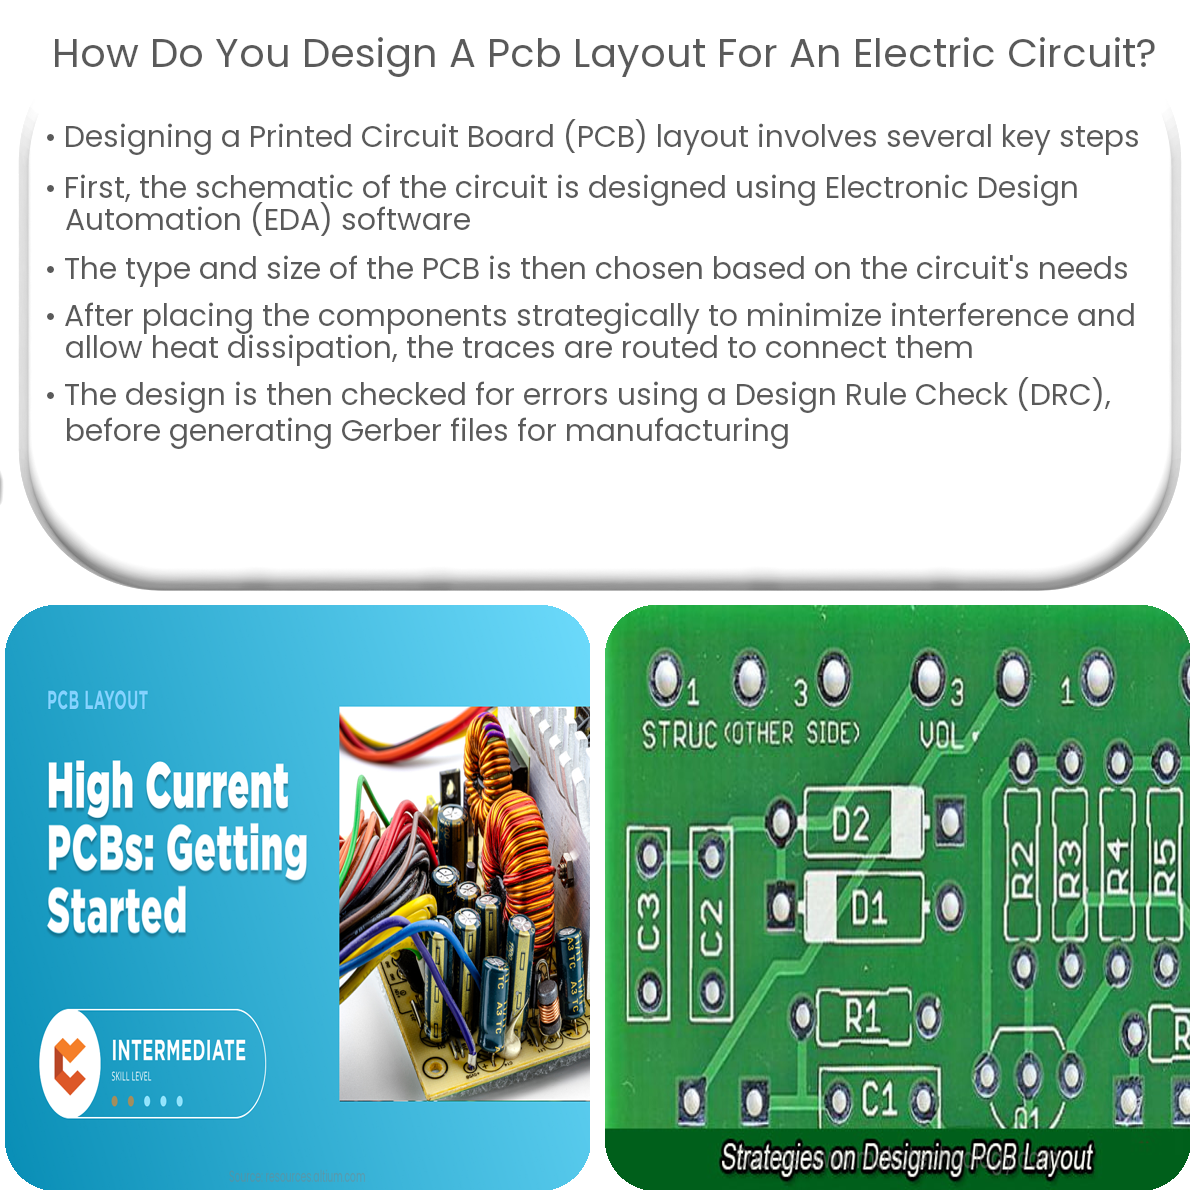 How do you design a PCB layout for an electric circuit?